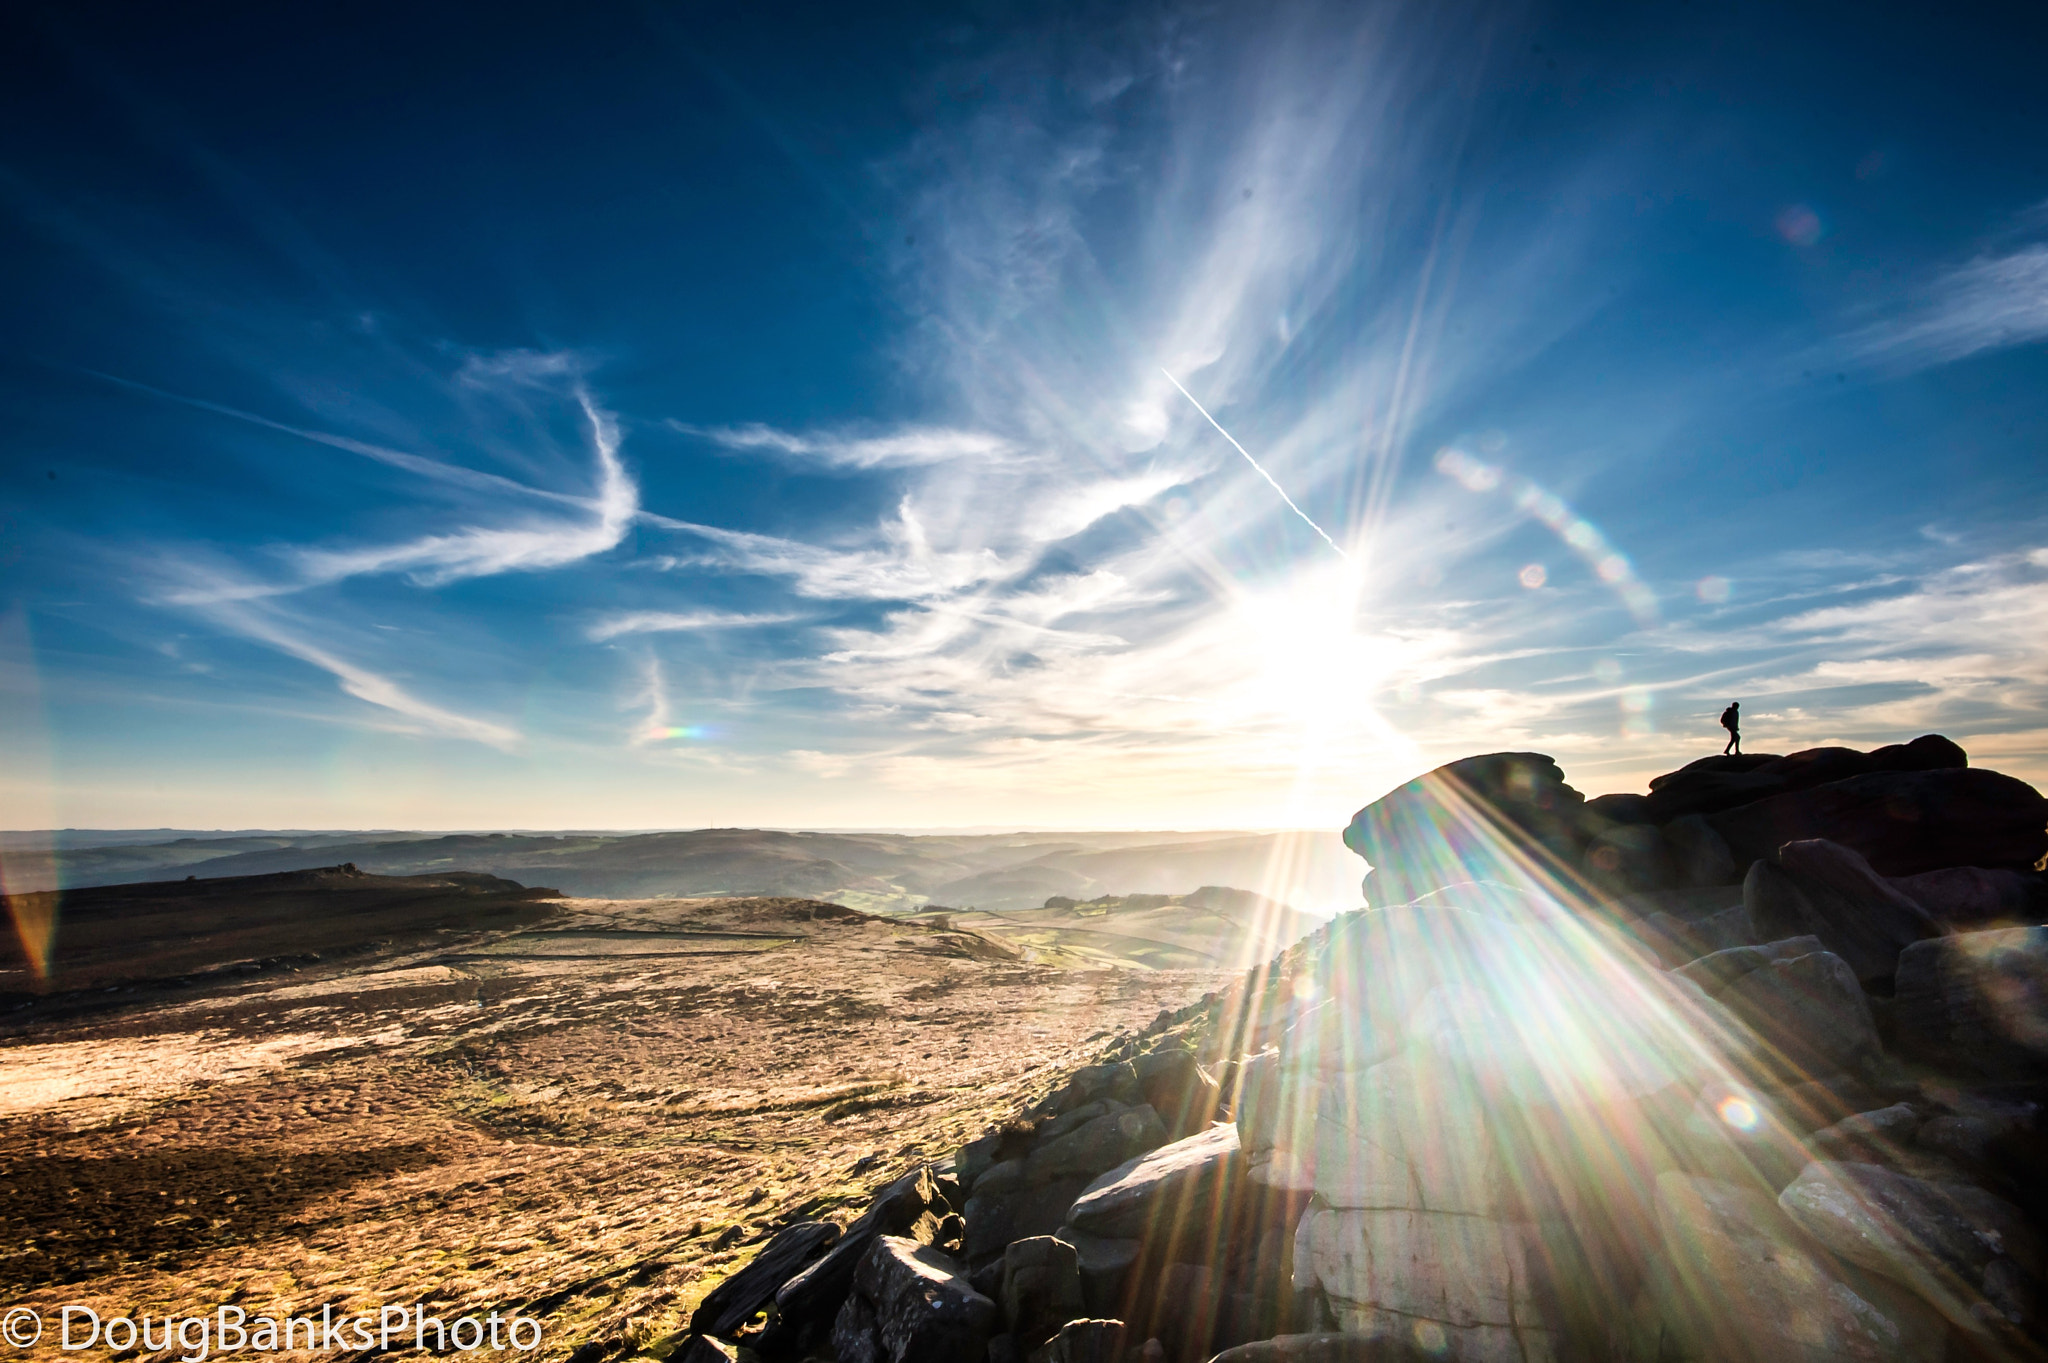 Nikon D750 sample photo. "on top of the world" - higger tor in the peak district photography